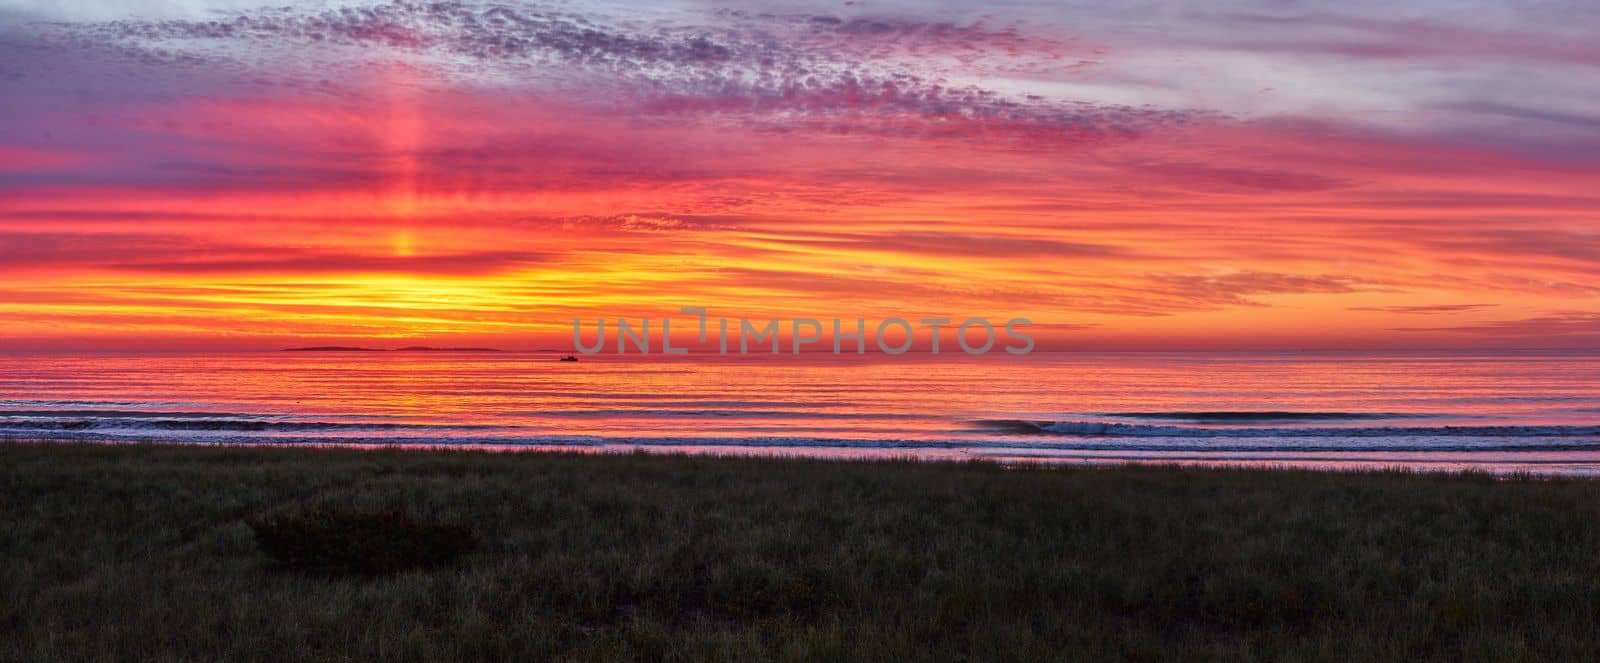 Image of Panorama of Maine east coast beach during beautiful sunrise with golden light